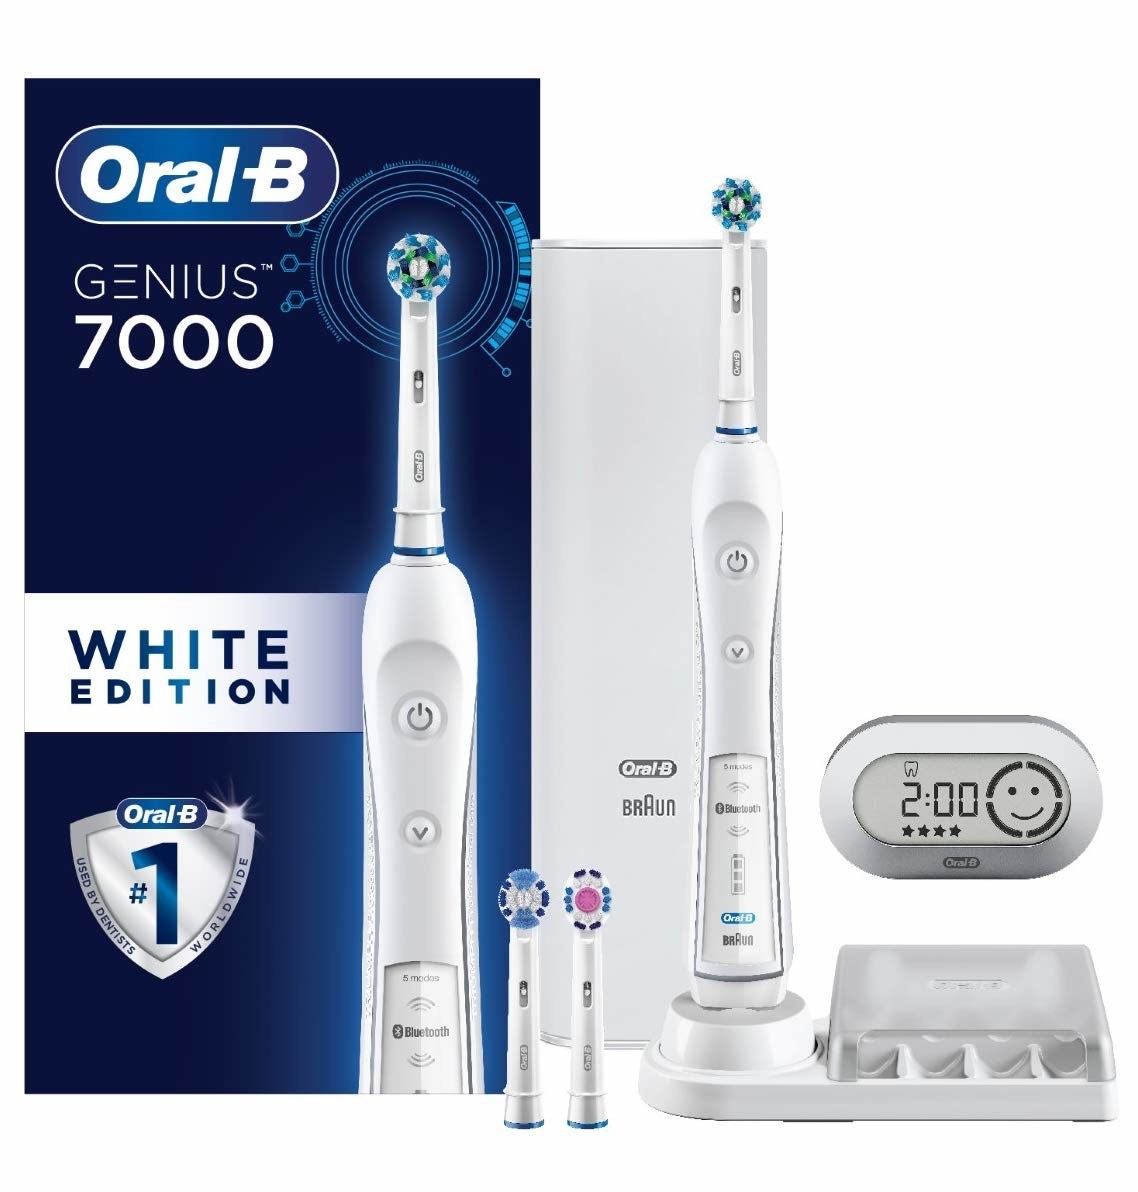 Oral-B Genius 7000 electric toothbrush on charging stand with included accessories